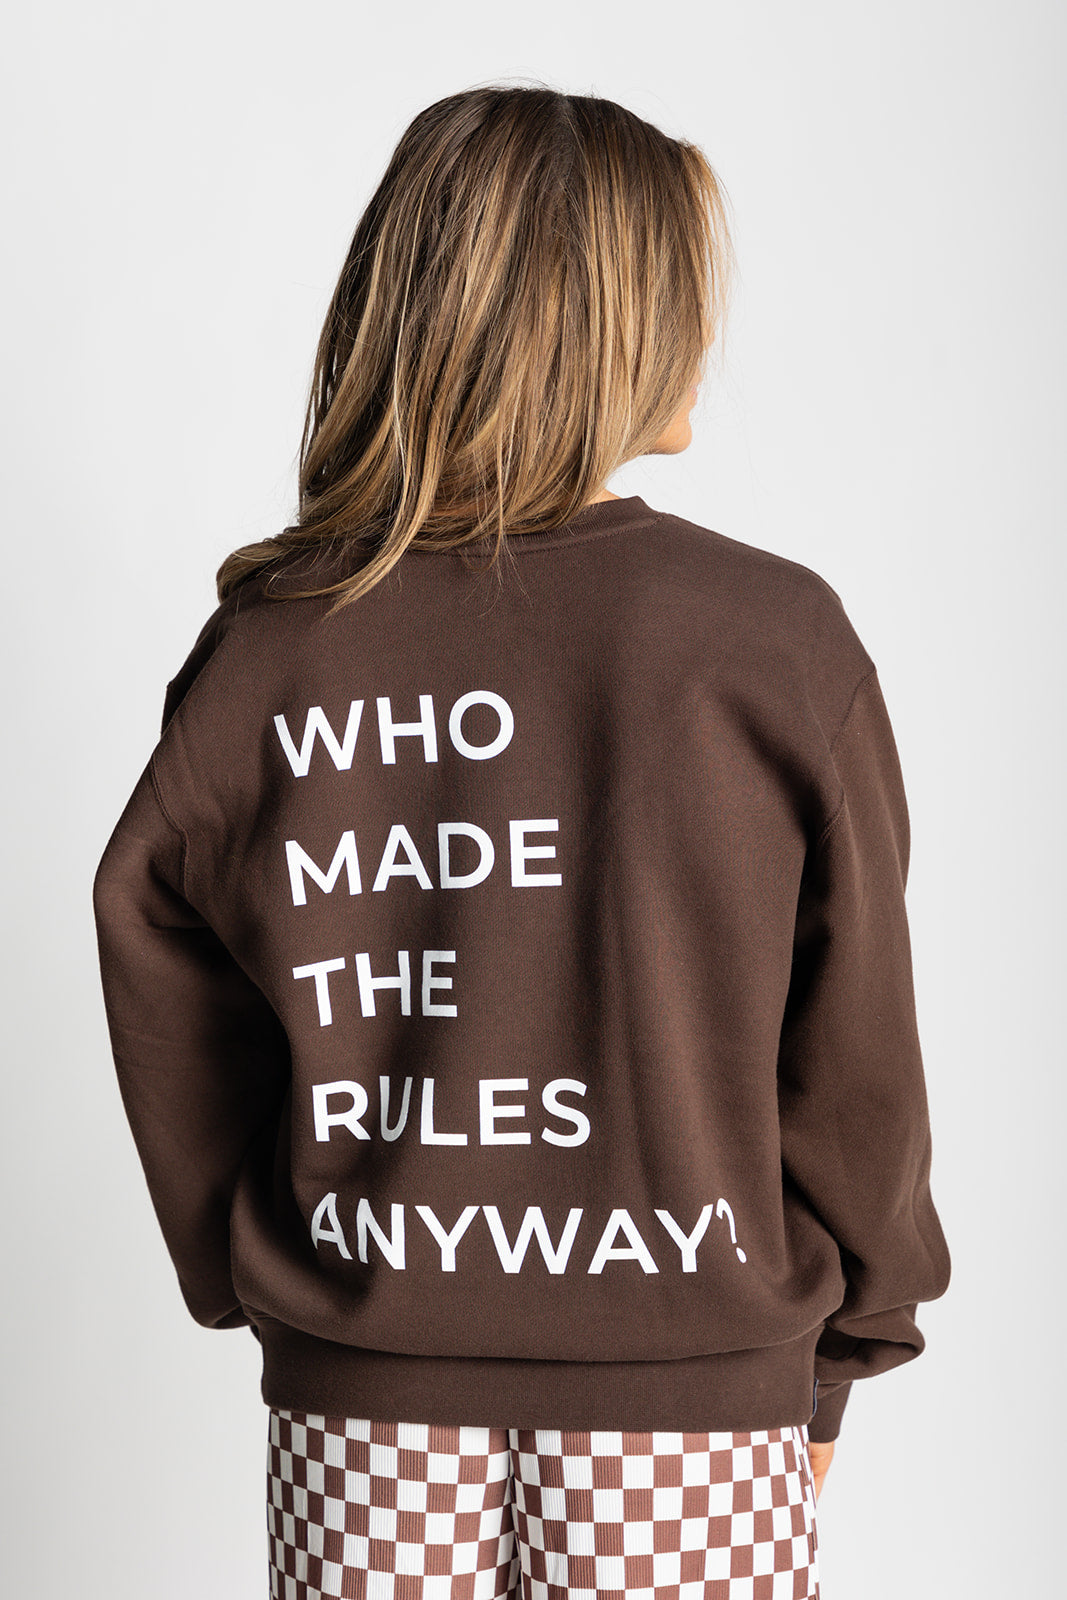 Bend the Rules Crewneck [S-3X]